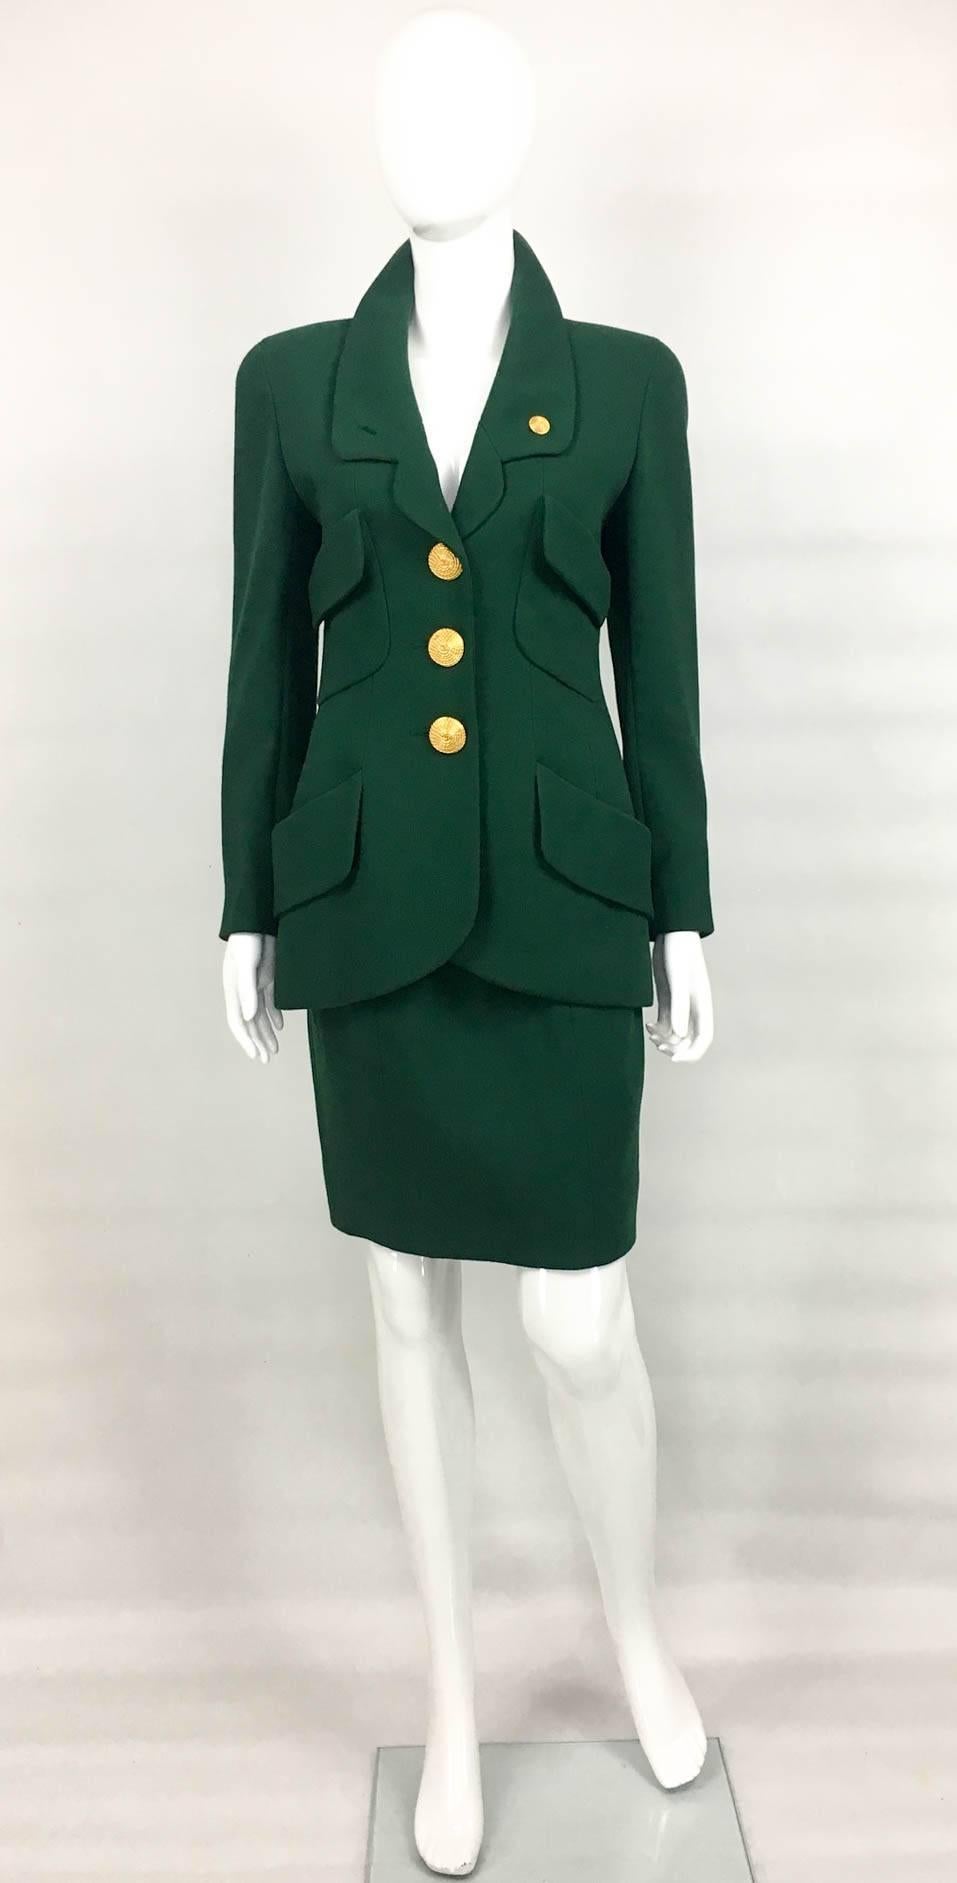 Super Stylish Vintage Chanel Green Suit. This amazing skirt suit by Chanel is made in bottle green wool and dates back from 1992. Impeccably tailored, with paneling and defined waist, it features four front flap pockets. The buttons are very special